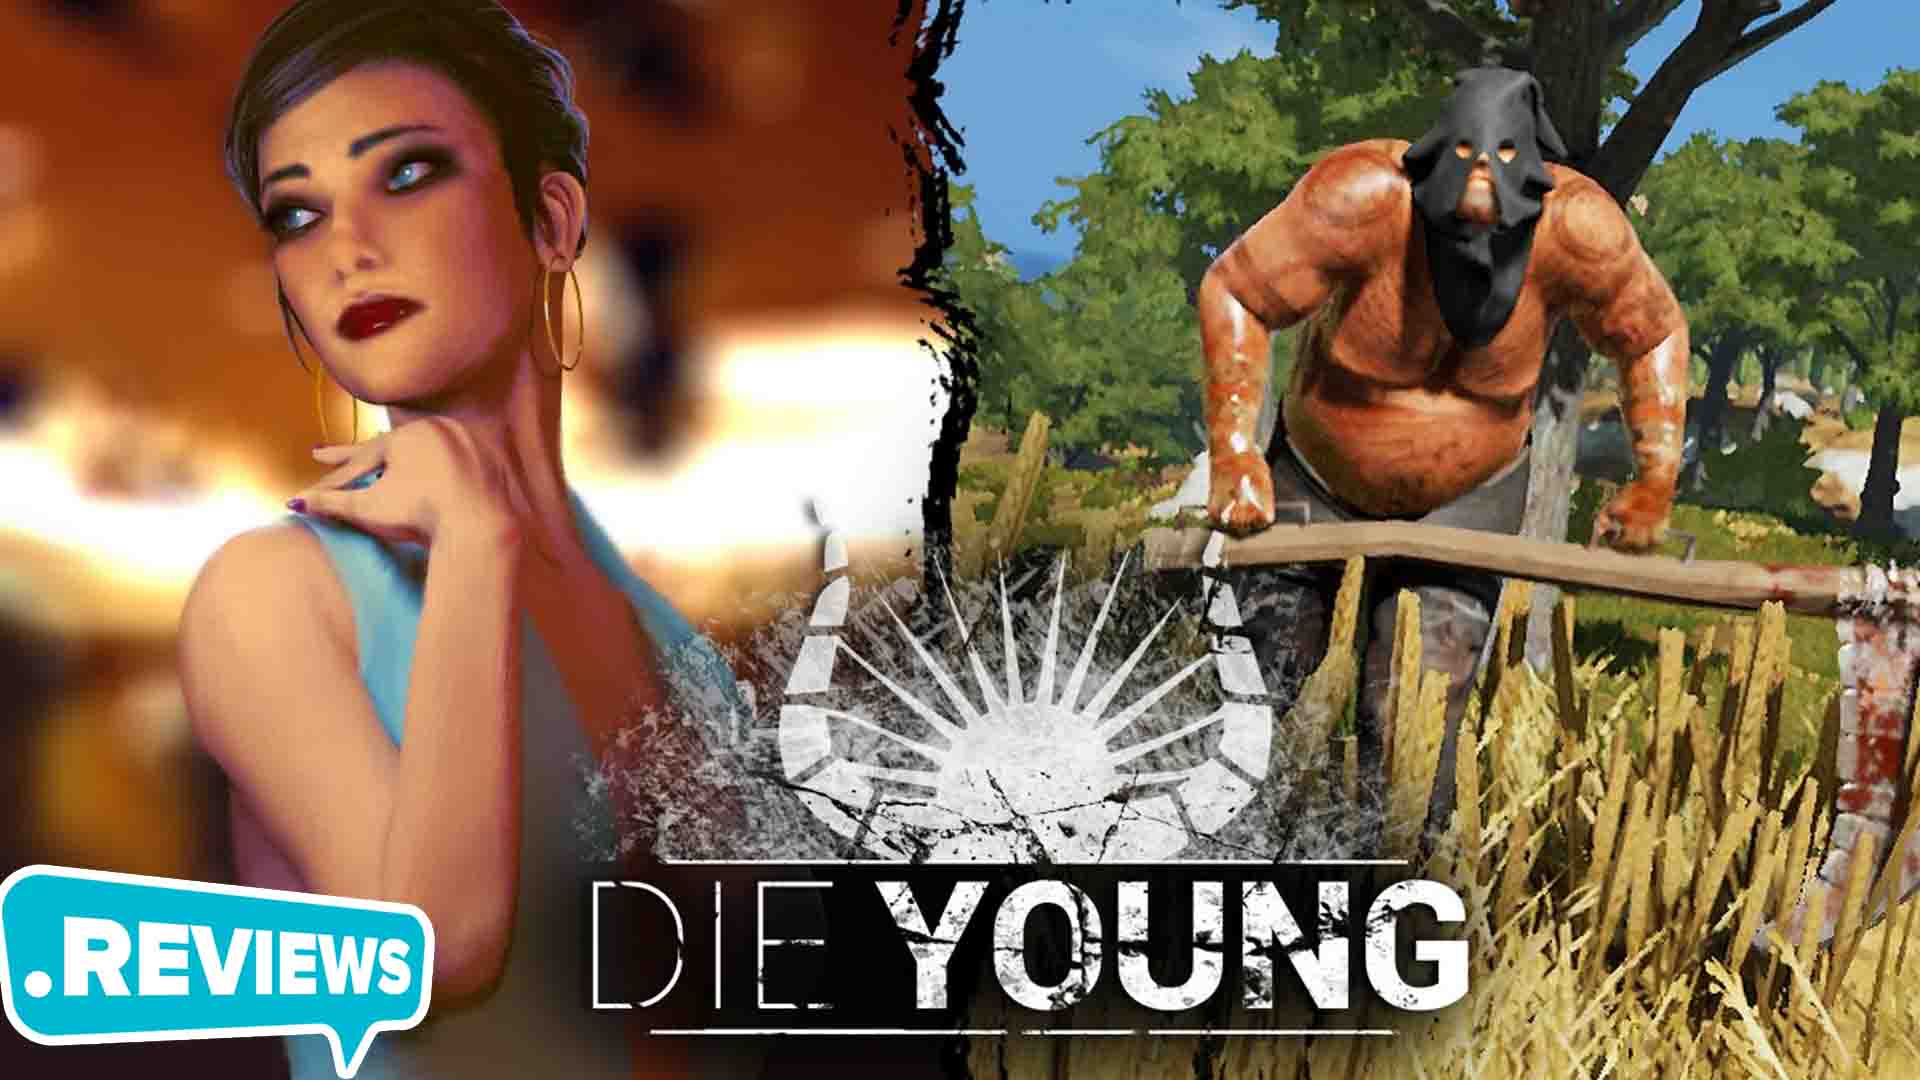 Very young forum. Die young игра. Die young игра Главная героиня. Die young (2019) ПК игра.